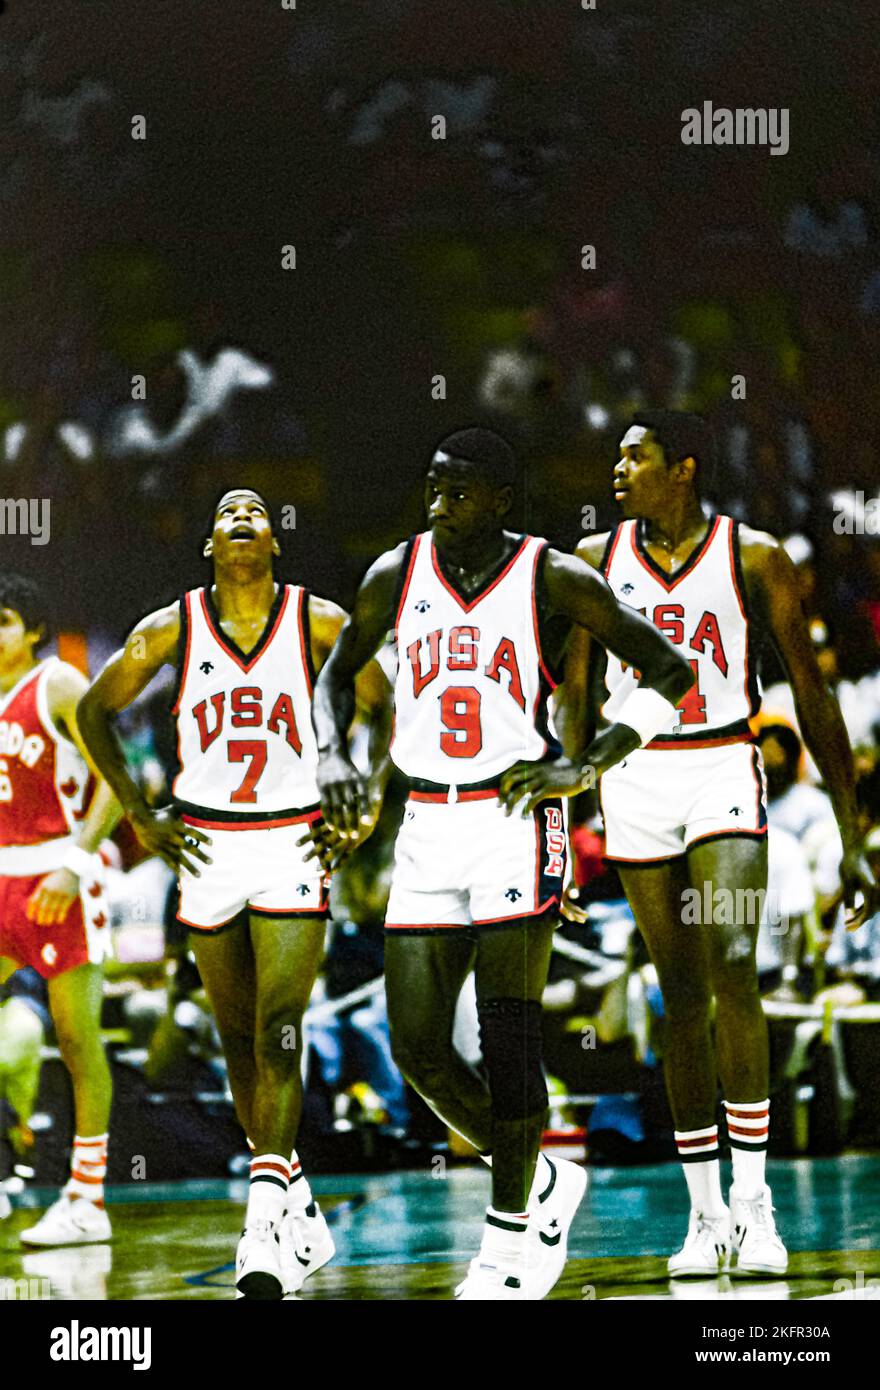 Michael Jordan (USA) competing at the 1984 Olympic Summer Games. Stock Photo